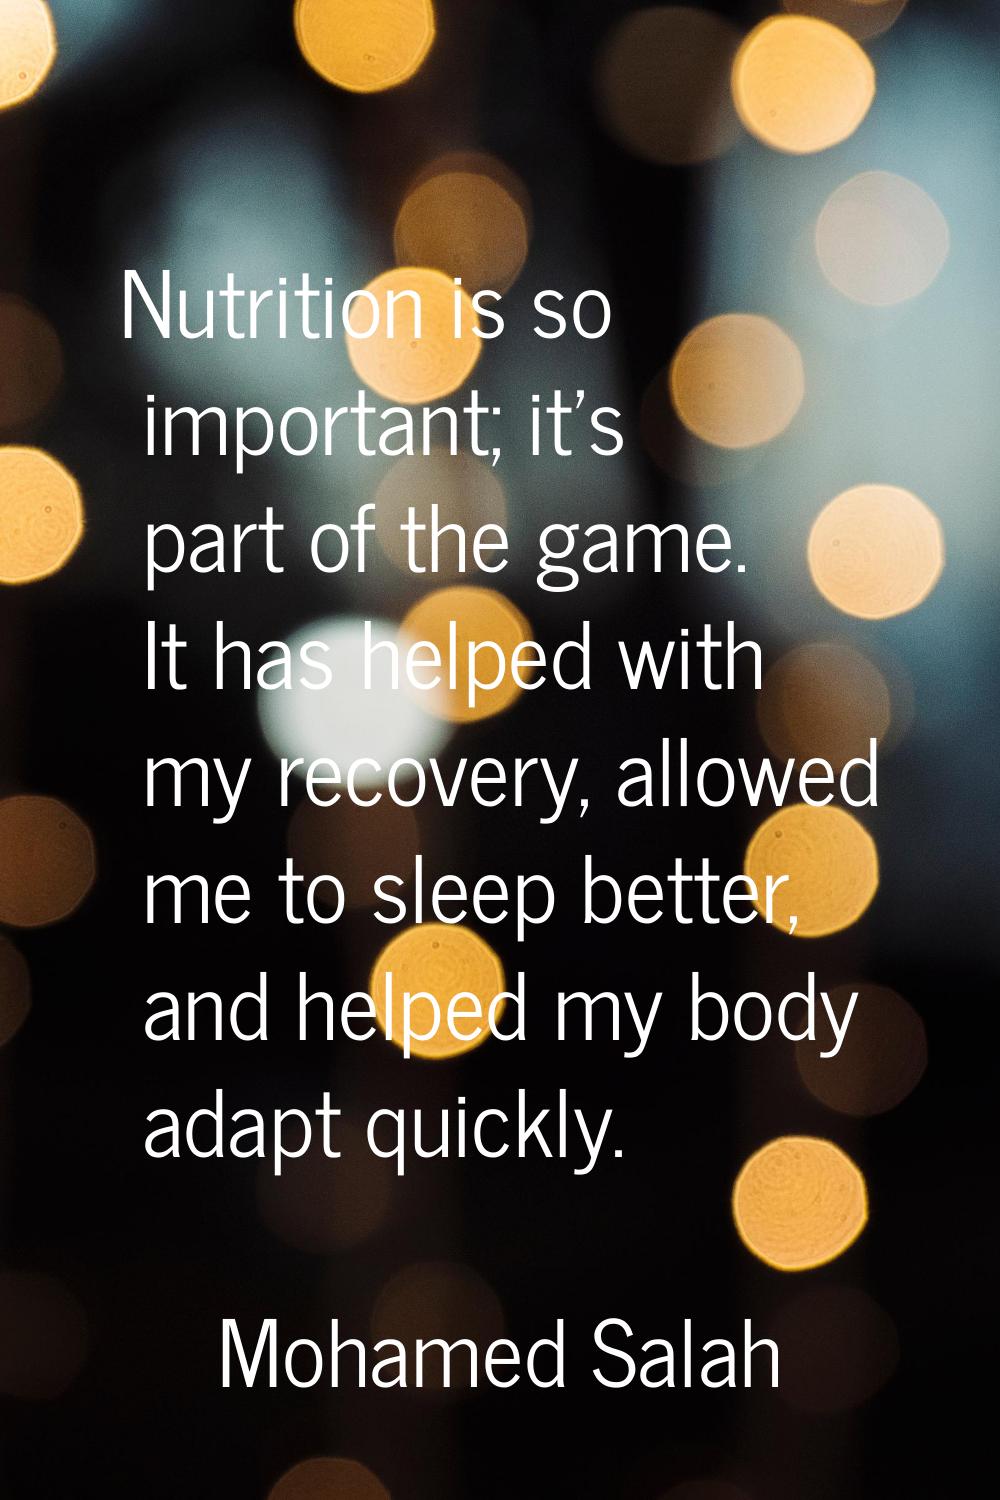 Nutrition is so important; it's part of the game. It has helped with my recovery, allowed me to sle